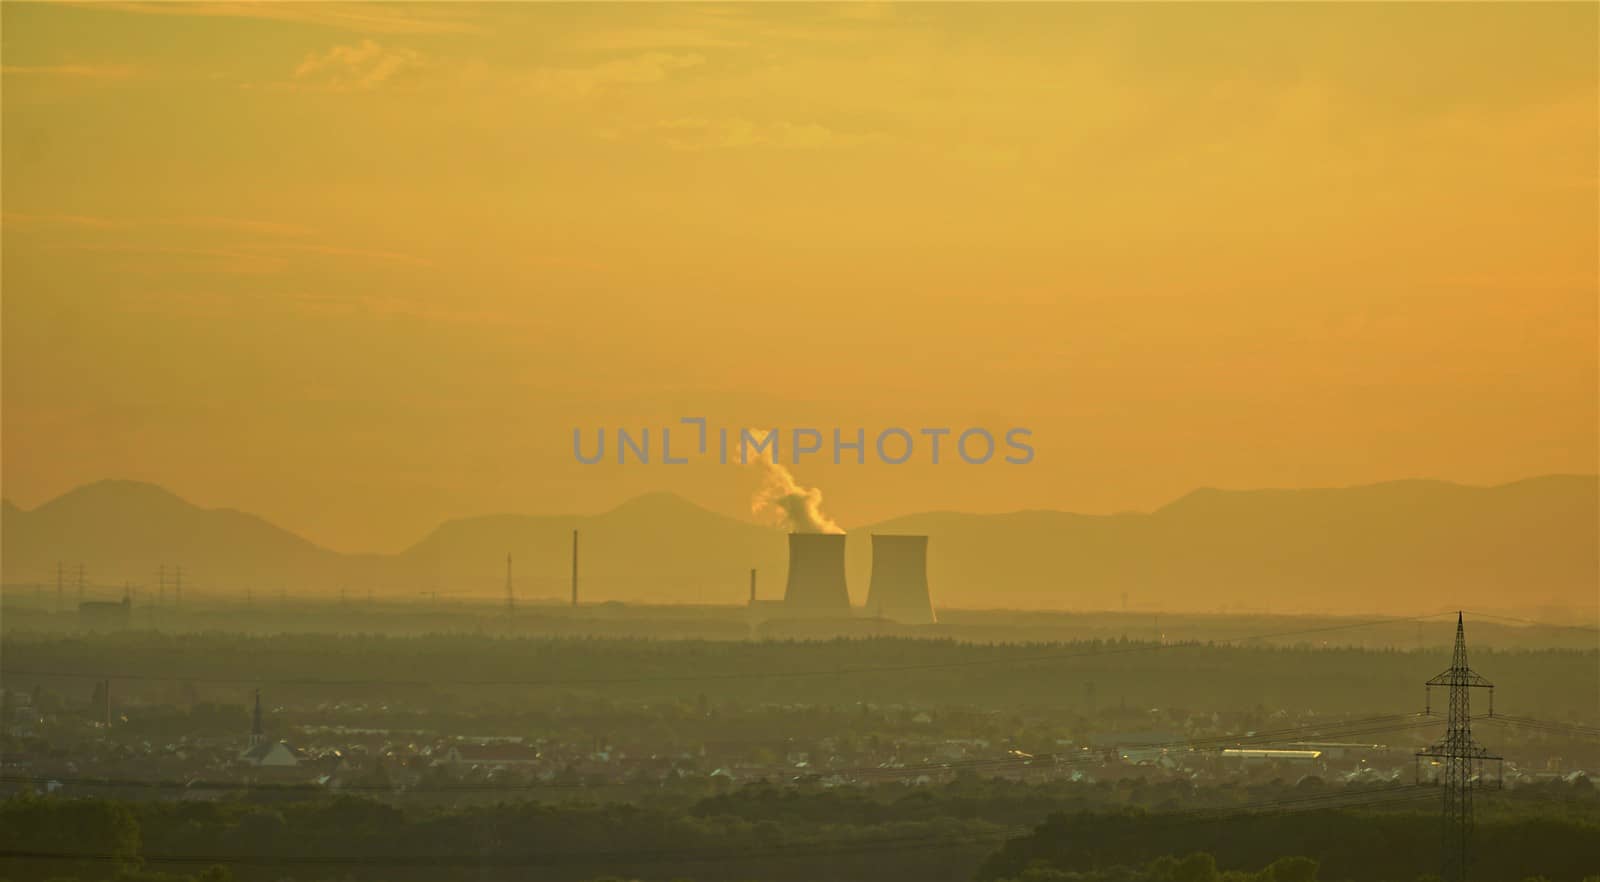 View over rhine valley with nuclear power plant by pisces2386